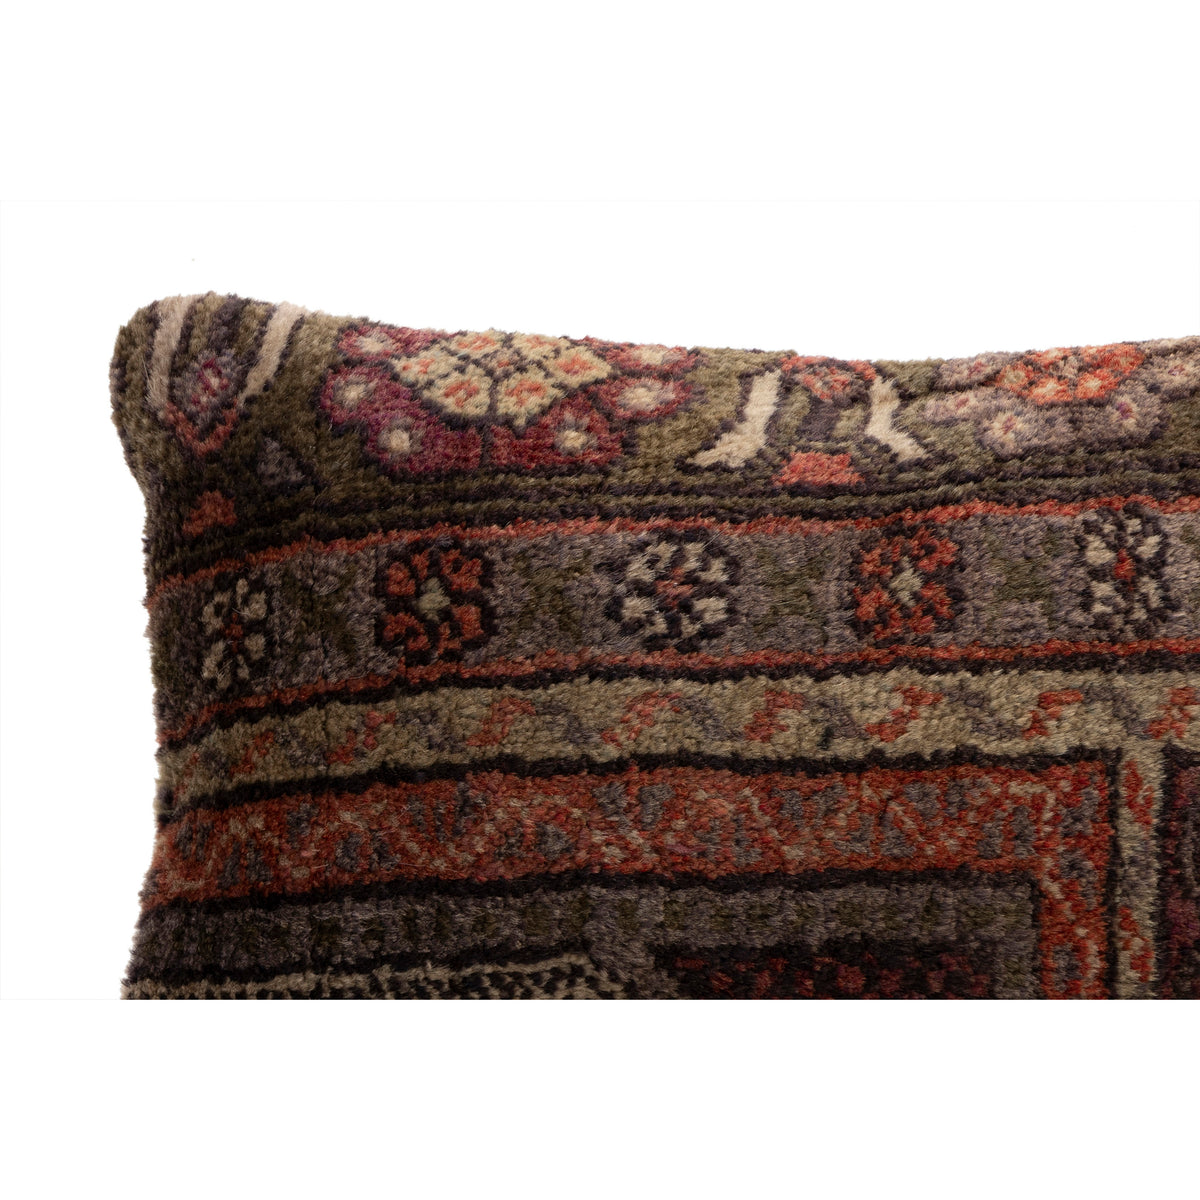 Handwoven Ethnic Rug Pillow Cover 12" x 20"